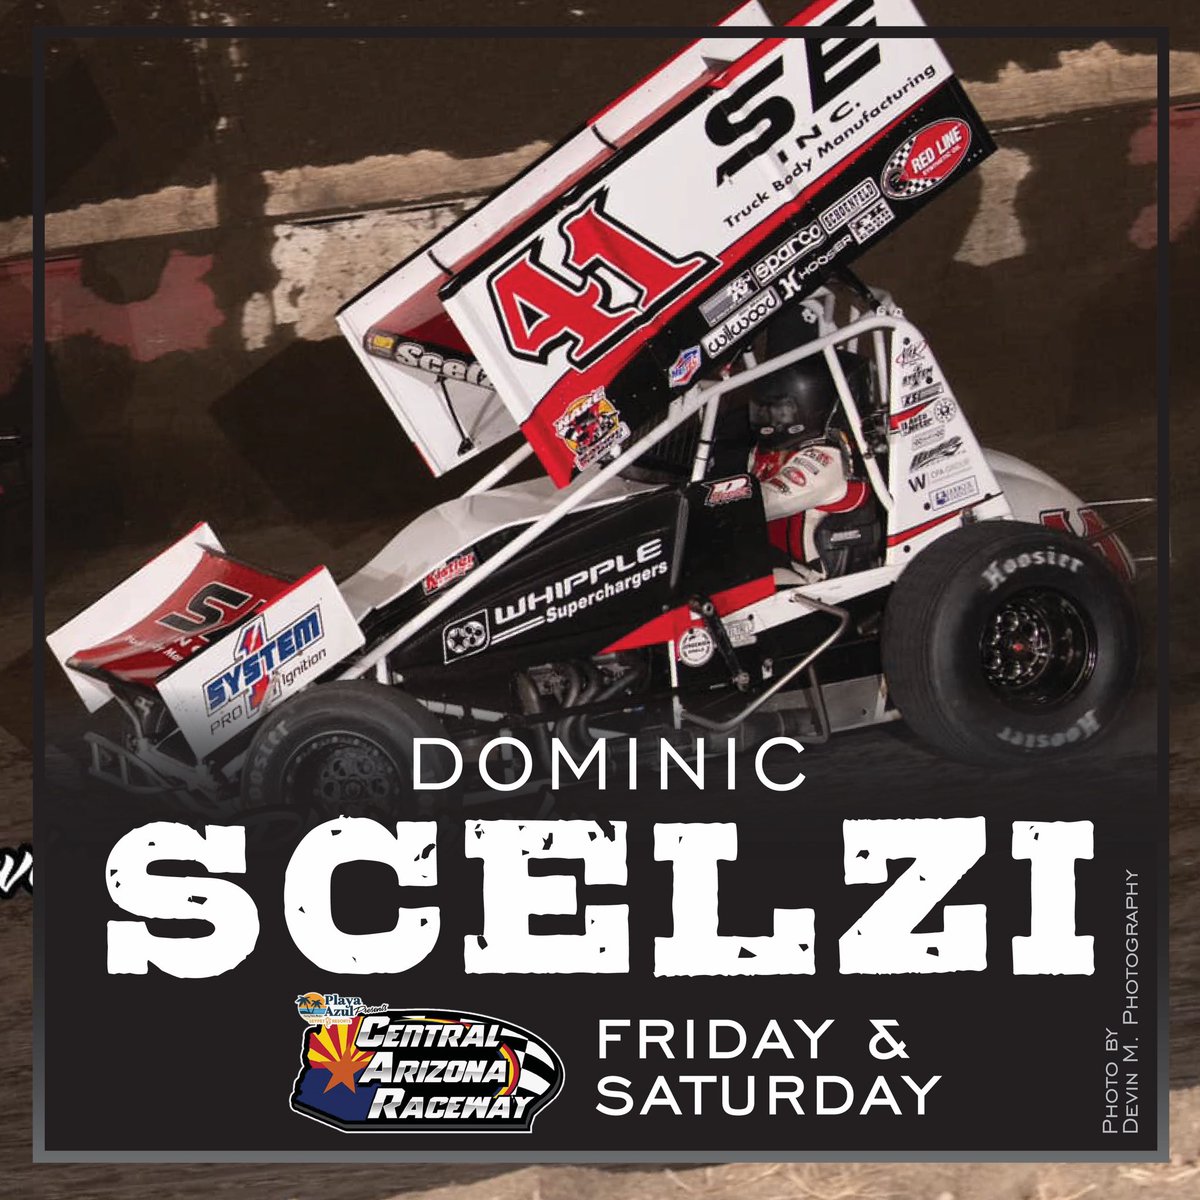 A trip to Arizona is on tap for Dominic Scelzi! #TeamILP